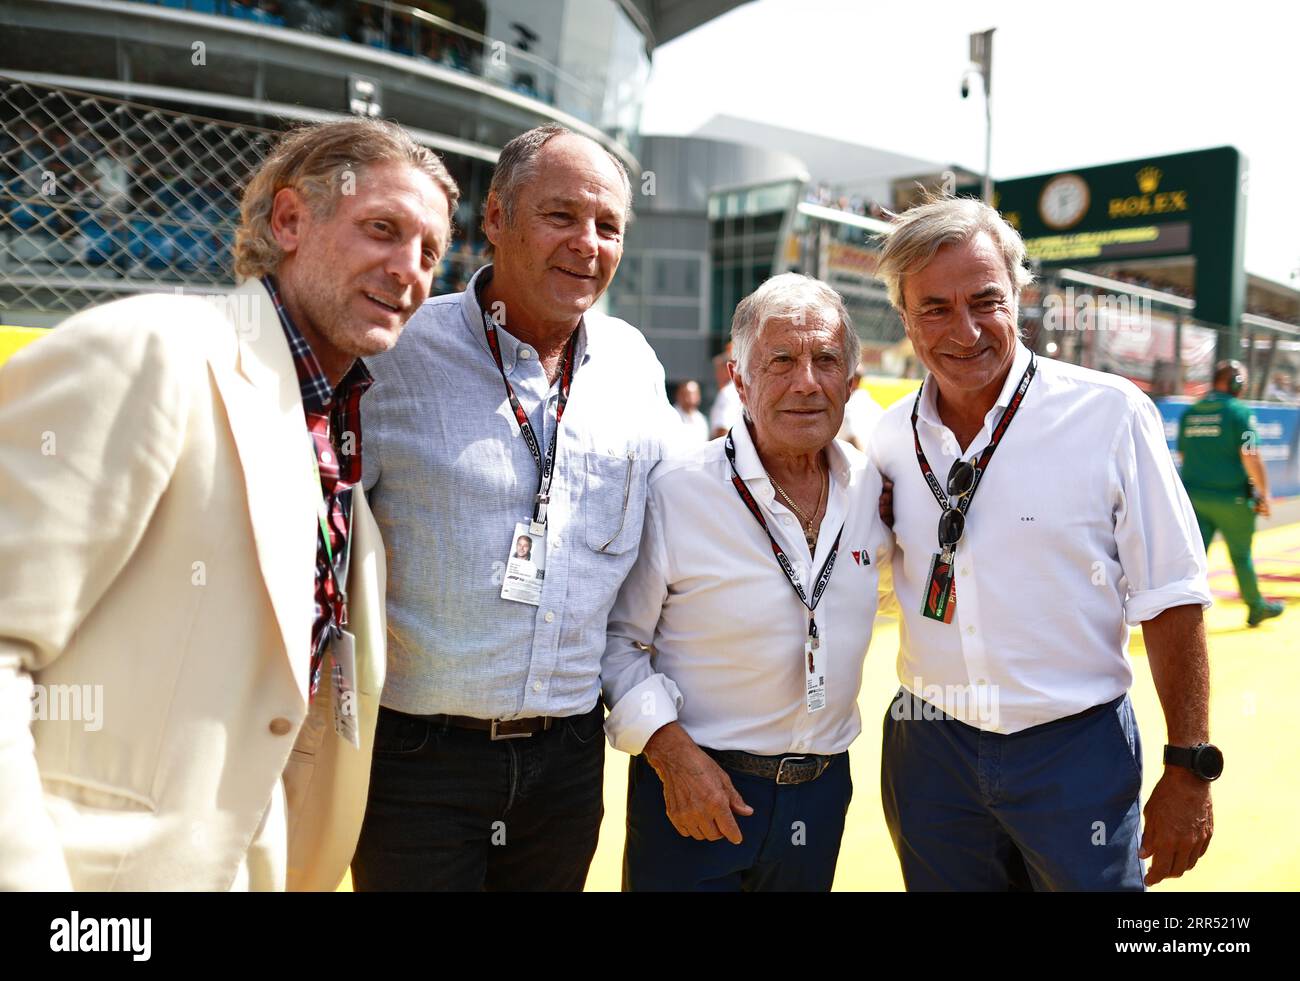 MONZA, Italy, 3. September 2023; (L-R) Lapo ELKANN, New York-born Italian industrialist, former marketing manager and heir to the automaker Fiat. Gerhard BERGER, former F1 pilot with Ferrari, ATS, Benetton F1, Giacomo AGOSTINI is an Italian former Grand Prix motorcycle road racer. Nicknamed Ago, he amassed 122 Grand Prix wins and 15 World Championship titles. Carlos SAINZ Senior, Cenamor, Spanish rally driver. He won the World Rally Championship drivers' title with Toyota in 1990 and 1992, and finished runner-up four times. Constructors' world champions to have benefited from Sainz are Subar Stock Photo